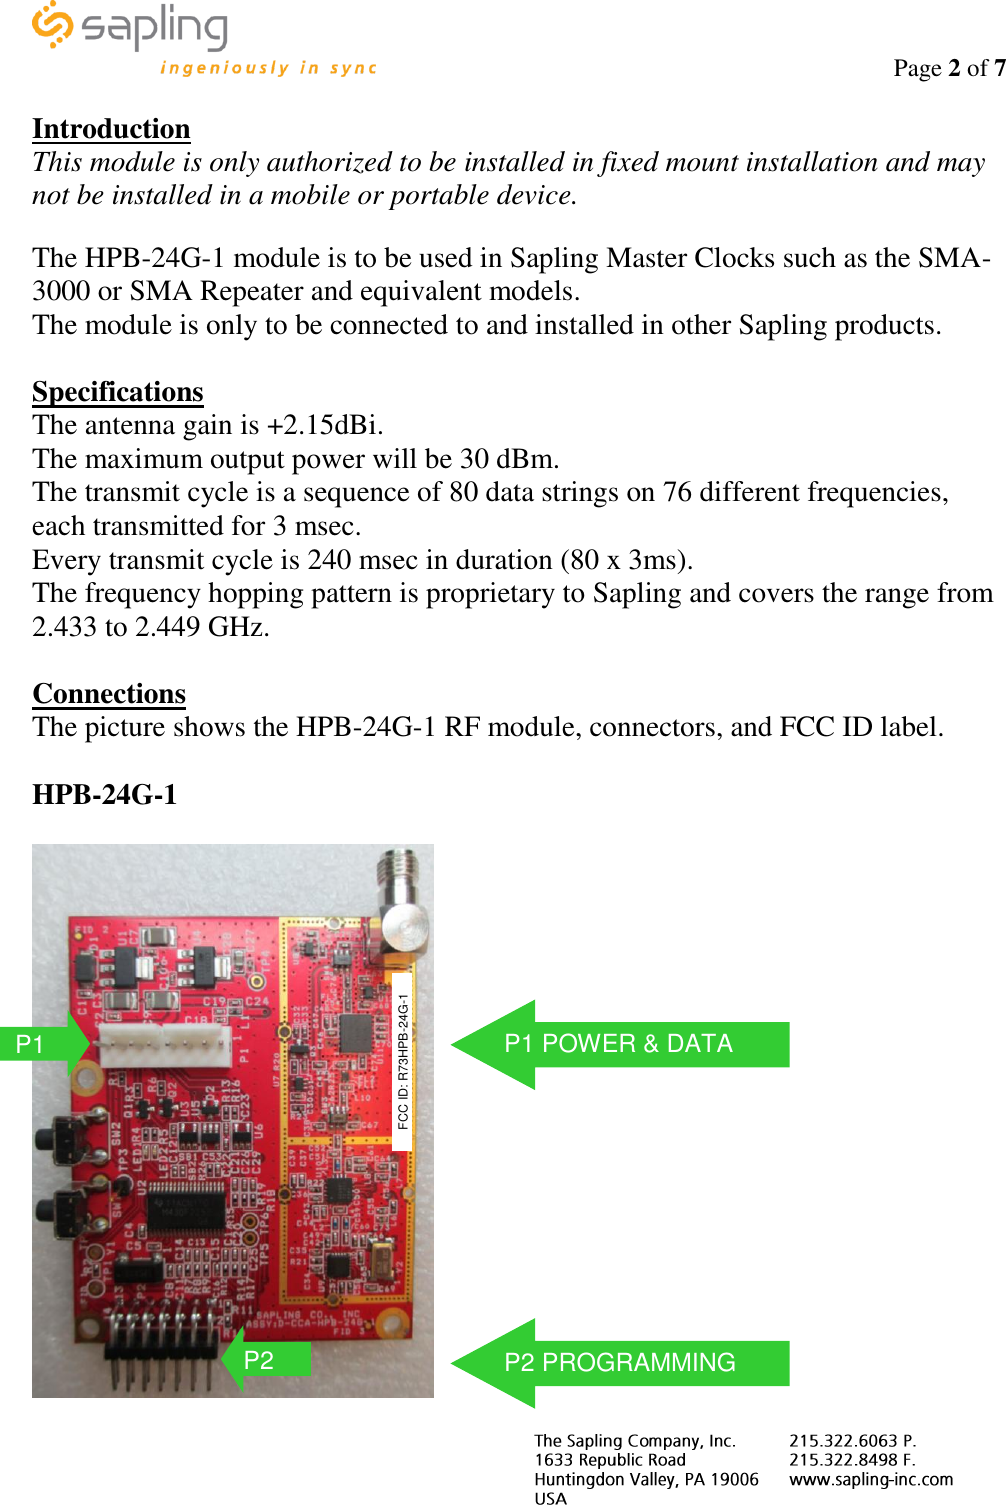                                                                                    Page 2 of 7     Introduction This module is only authorized to be installed in fixed mount installation and may not be installed in a mobile or portable device.  The HPB-24G-1 module is to be used in Sapling Master Clocks such as the SMA-3000 or SMA Repeater and equivalent models. The module is only to be connected to and installed in other Sapling products.  Specifications The antenna gain is +2.15dBi. The maximum output power will be 30 dBm. The transmit cycle is a sequence of 80 data strings on 76 different frequencies, each transmitted for 3 msec. Every transmit cycle is 240 msec in duration (80 x 3ms). The frequency hopping pattern is proprietary to Sapling and covers the range from 2.433 to 2.449 GHz.  Connections The picture shows the HPB-24G-1 RF module, connectors, and FCC ID label.  HPB-24G-1   P1 FCC ID: R73HPB-24G-1 P2 P1 POWER &amp; DATA P2 PROGRAMMING 